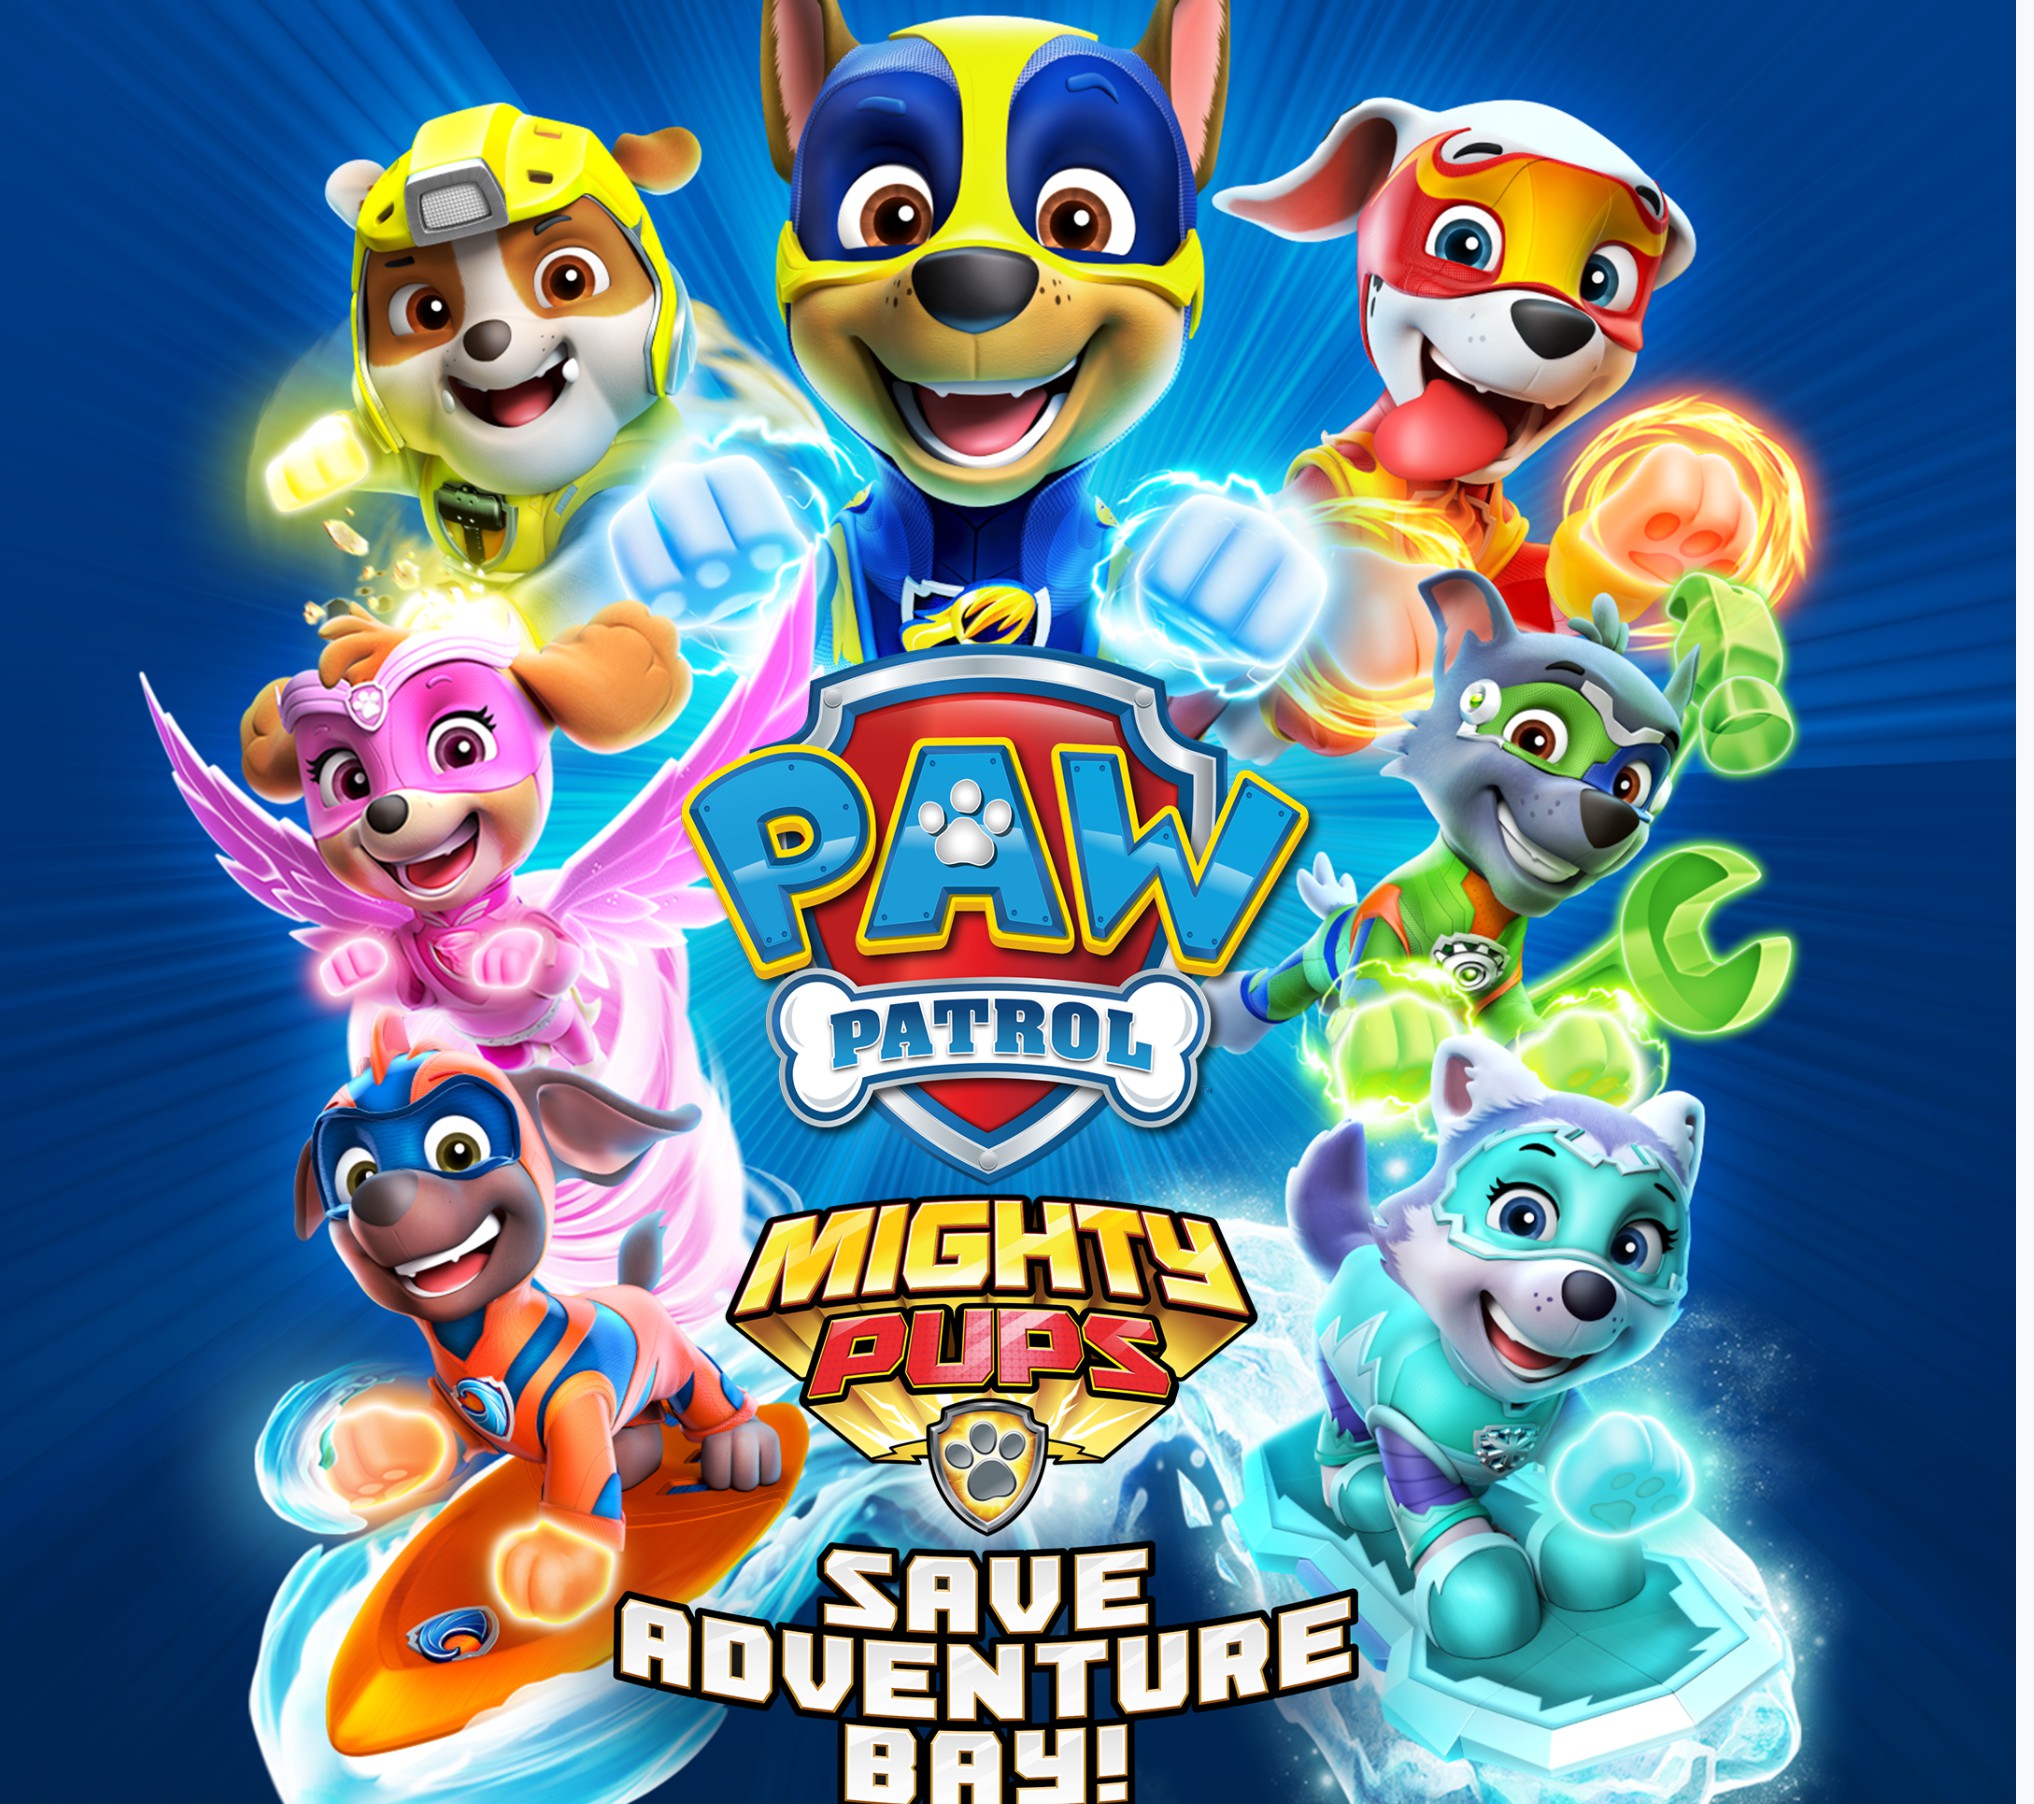 Paw patrol mighty pups thethoughtcatalogs.com